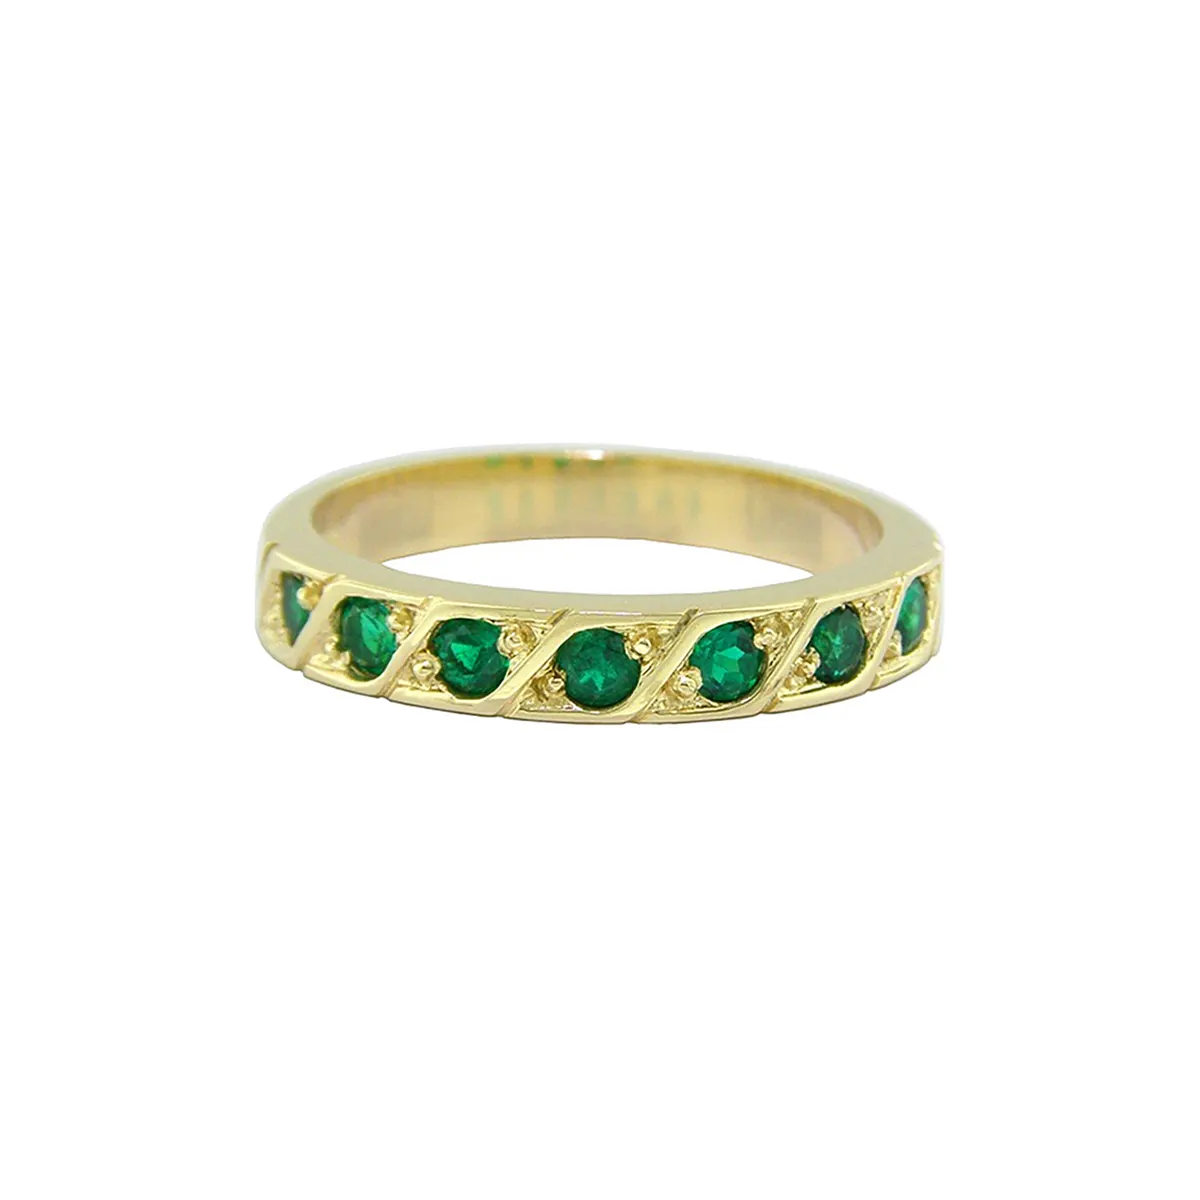 The width of this emerald band is 3.2 mm. The diameter of the round cut emeralds is 2.3 mm, and they were carefully selected for their quality and green hue